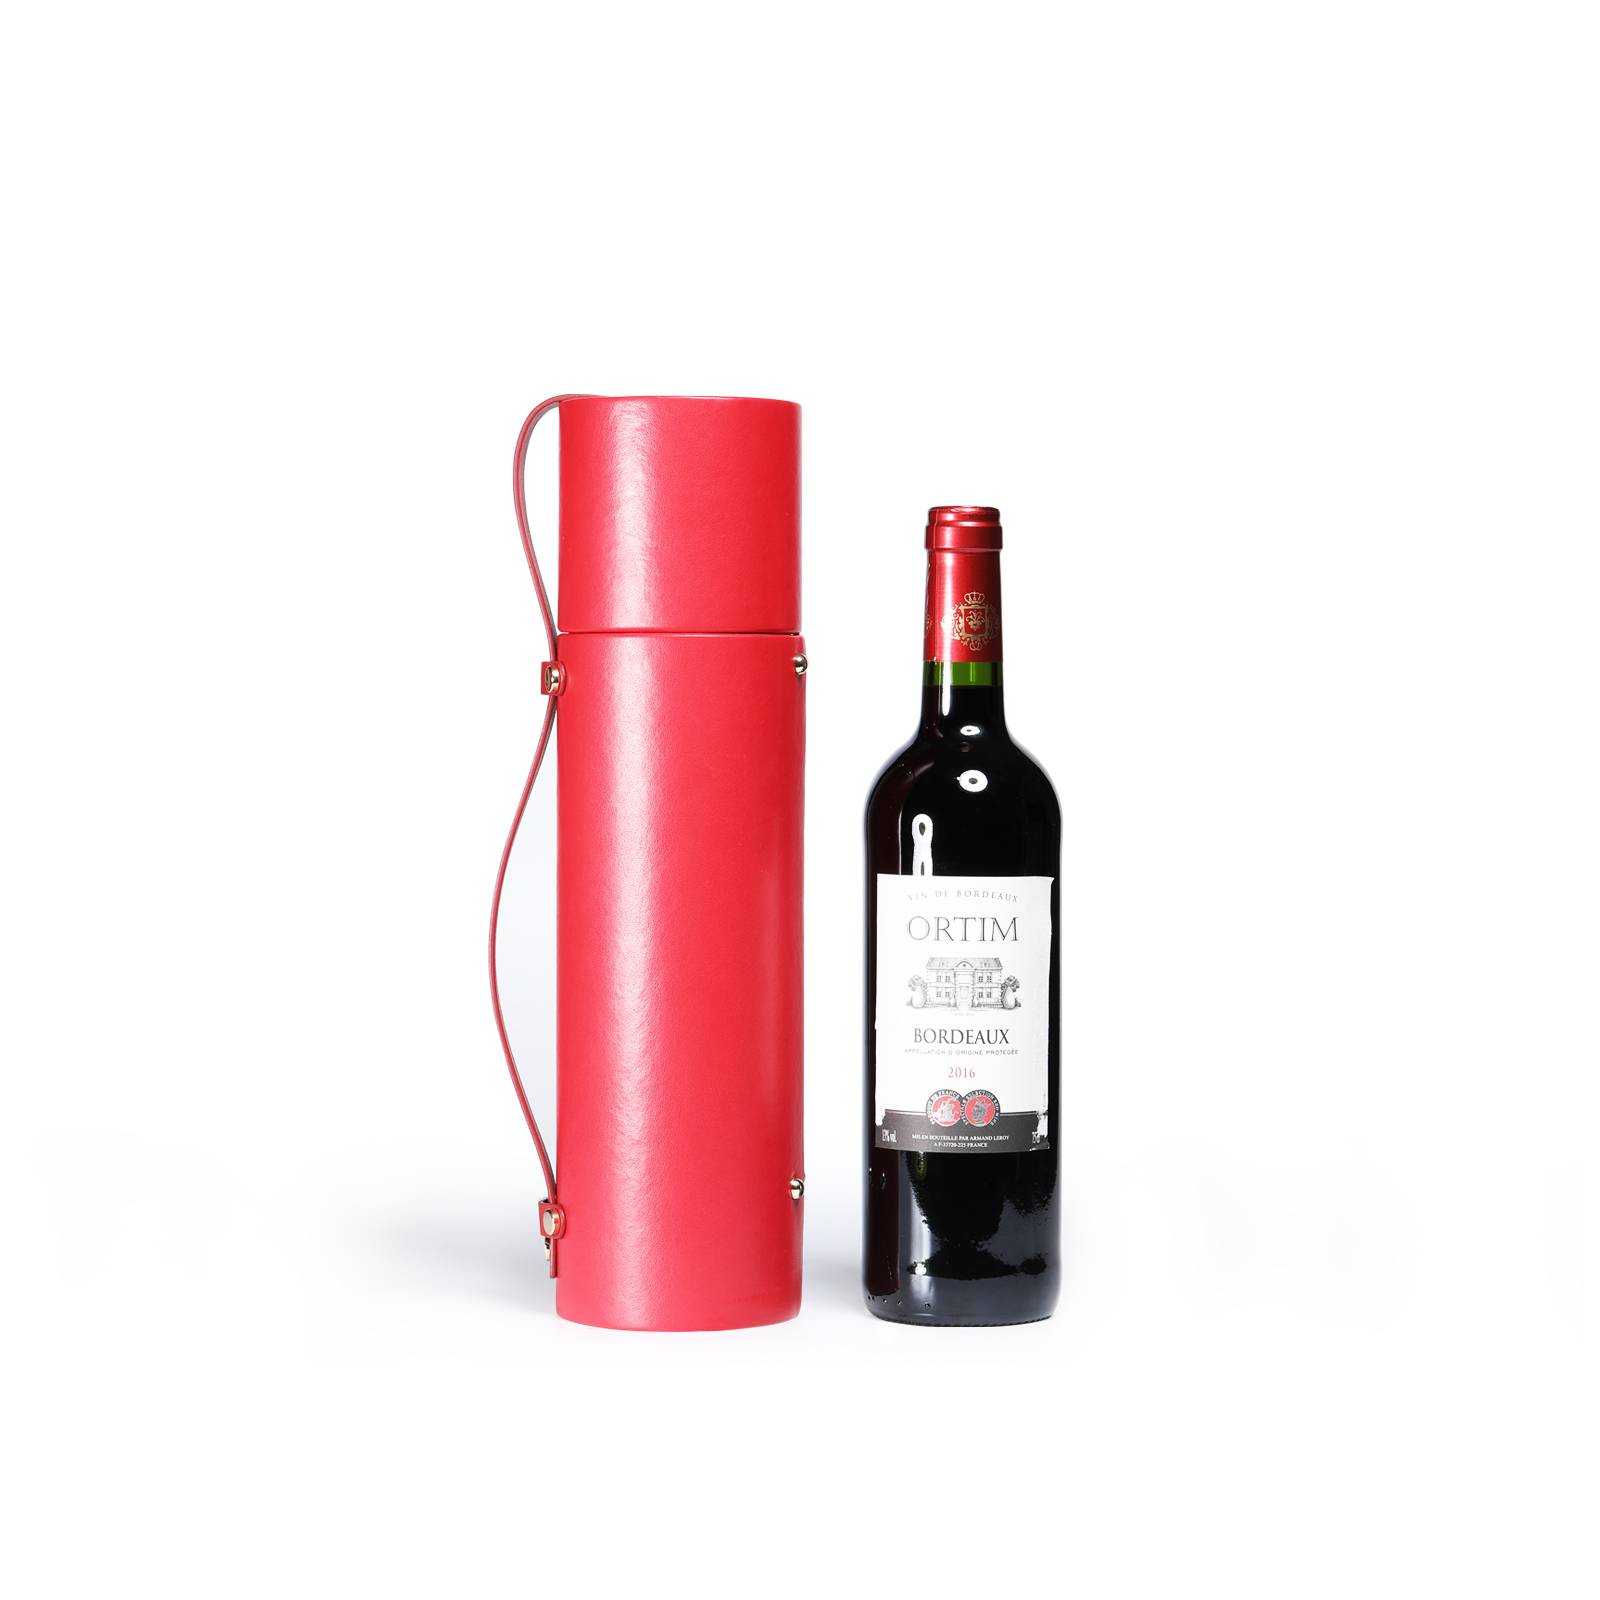 High quality logo printed red wine single bottle box leather gift box